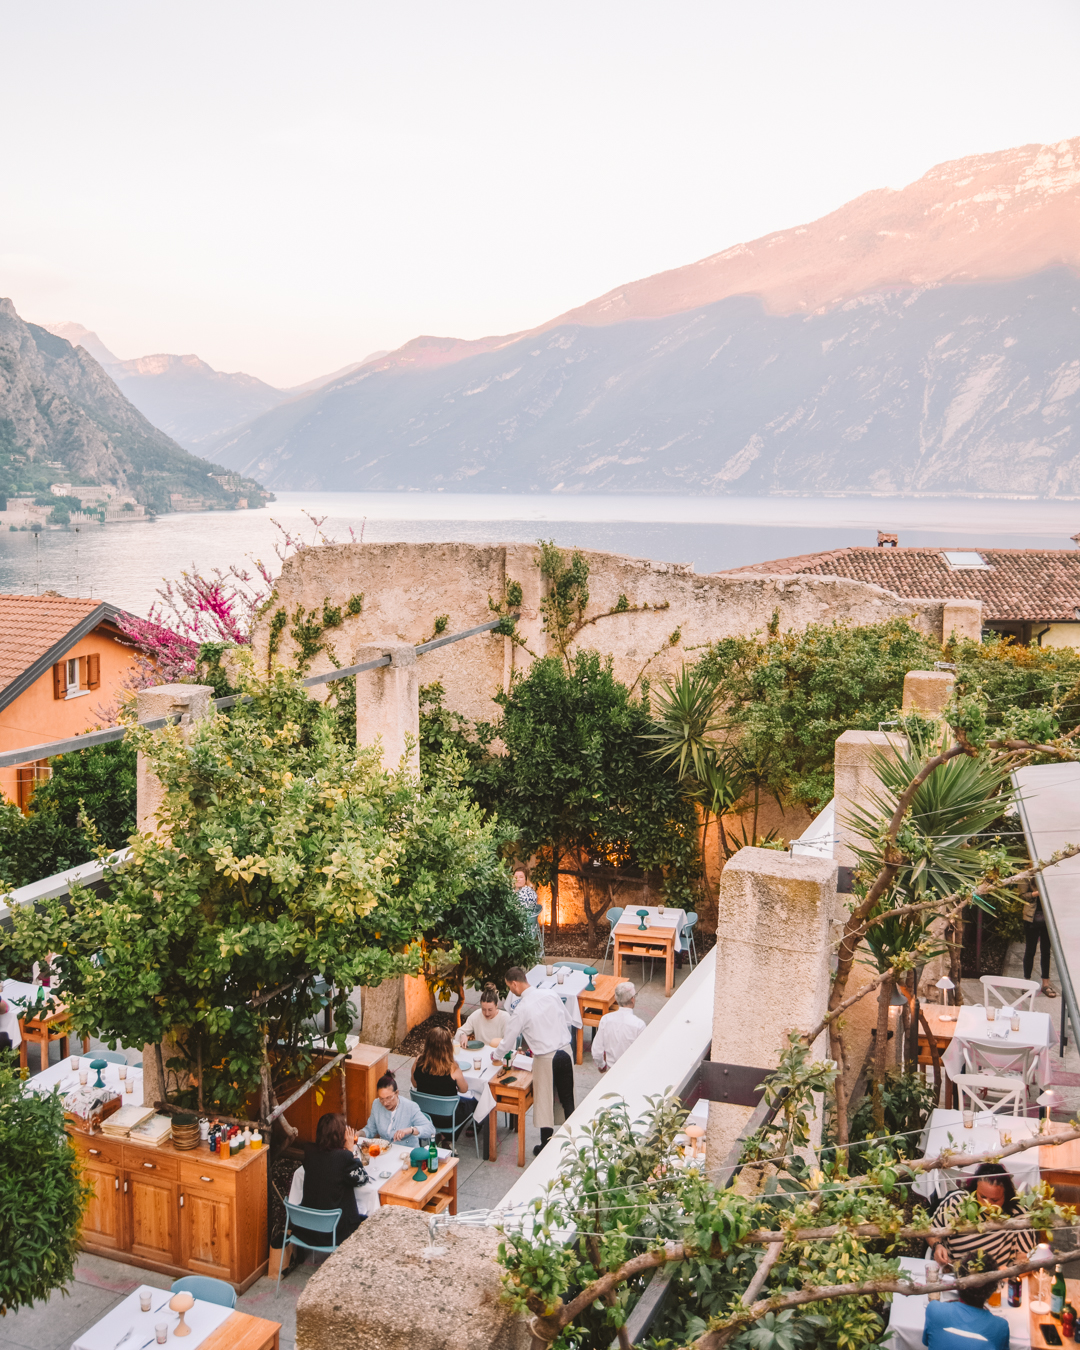 A restaurant in Limone sul Garda with the mountains behind it and an open roof